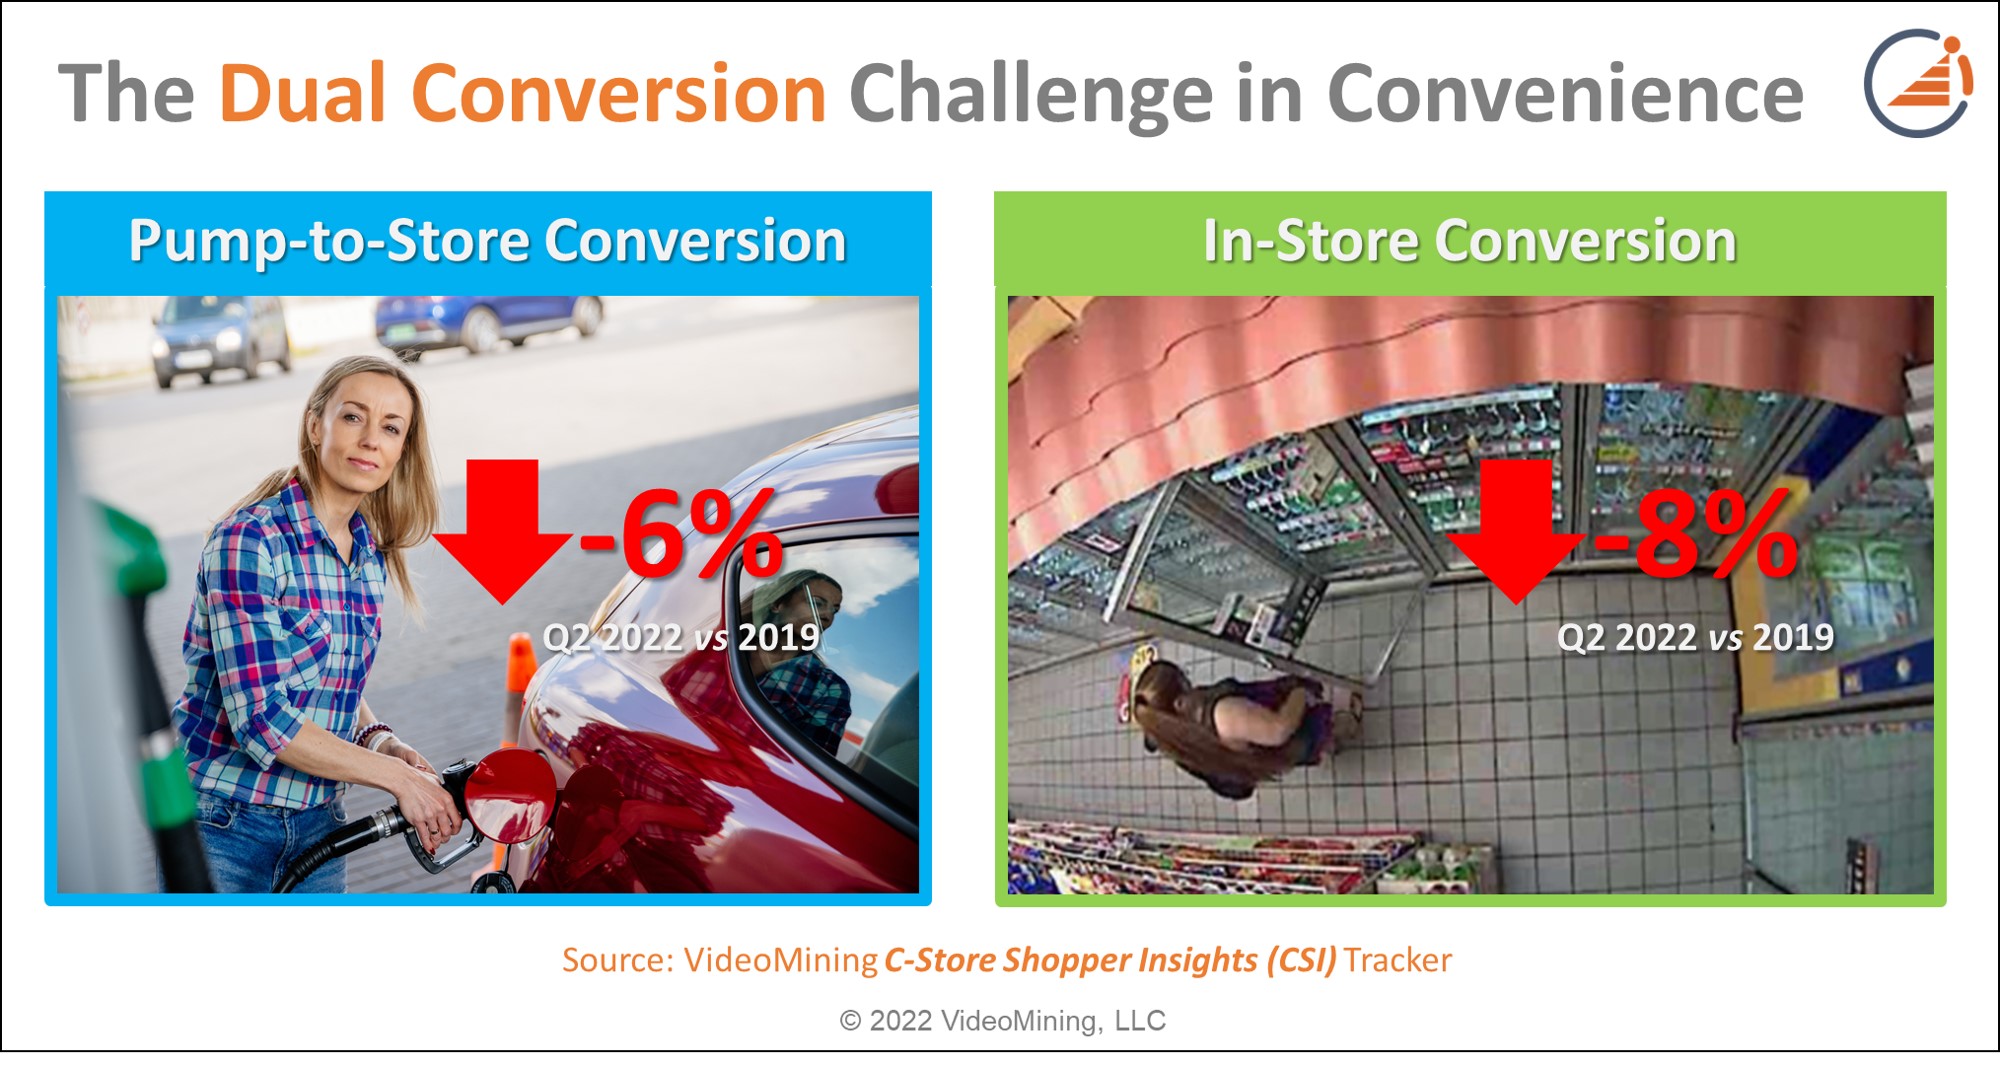 The Dual Conversion Challenge in Convenience